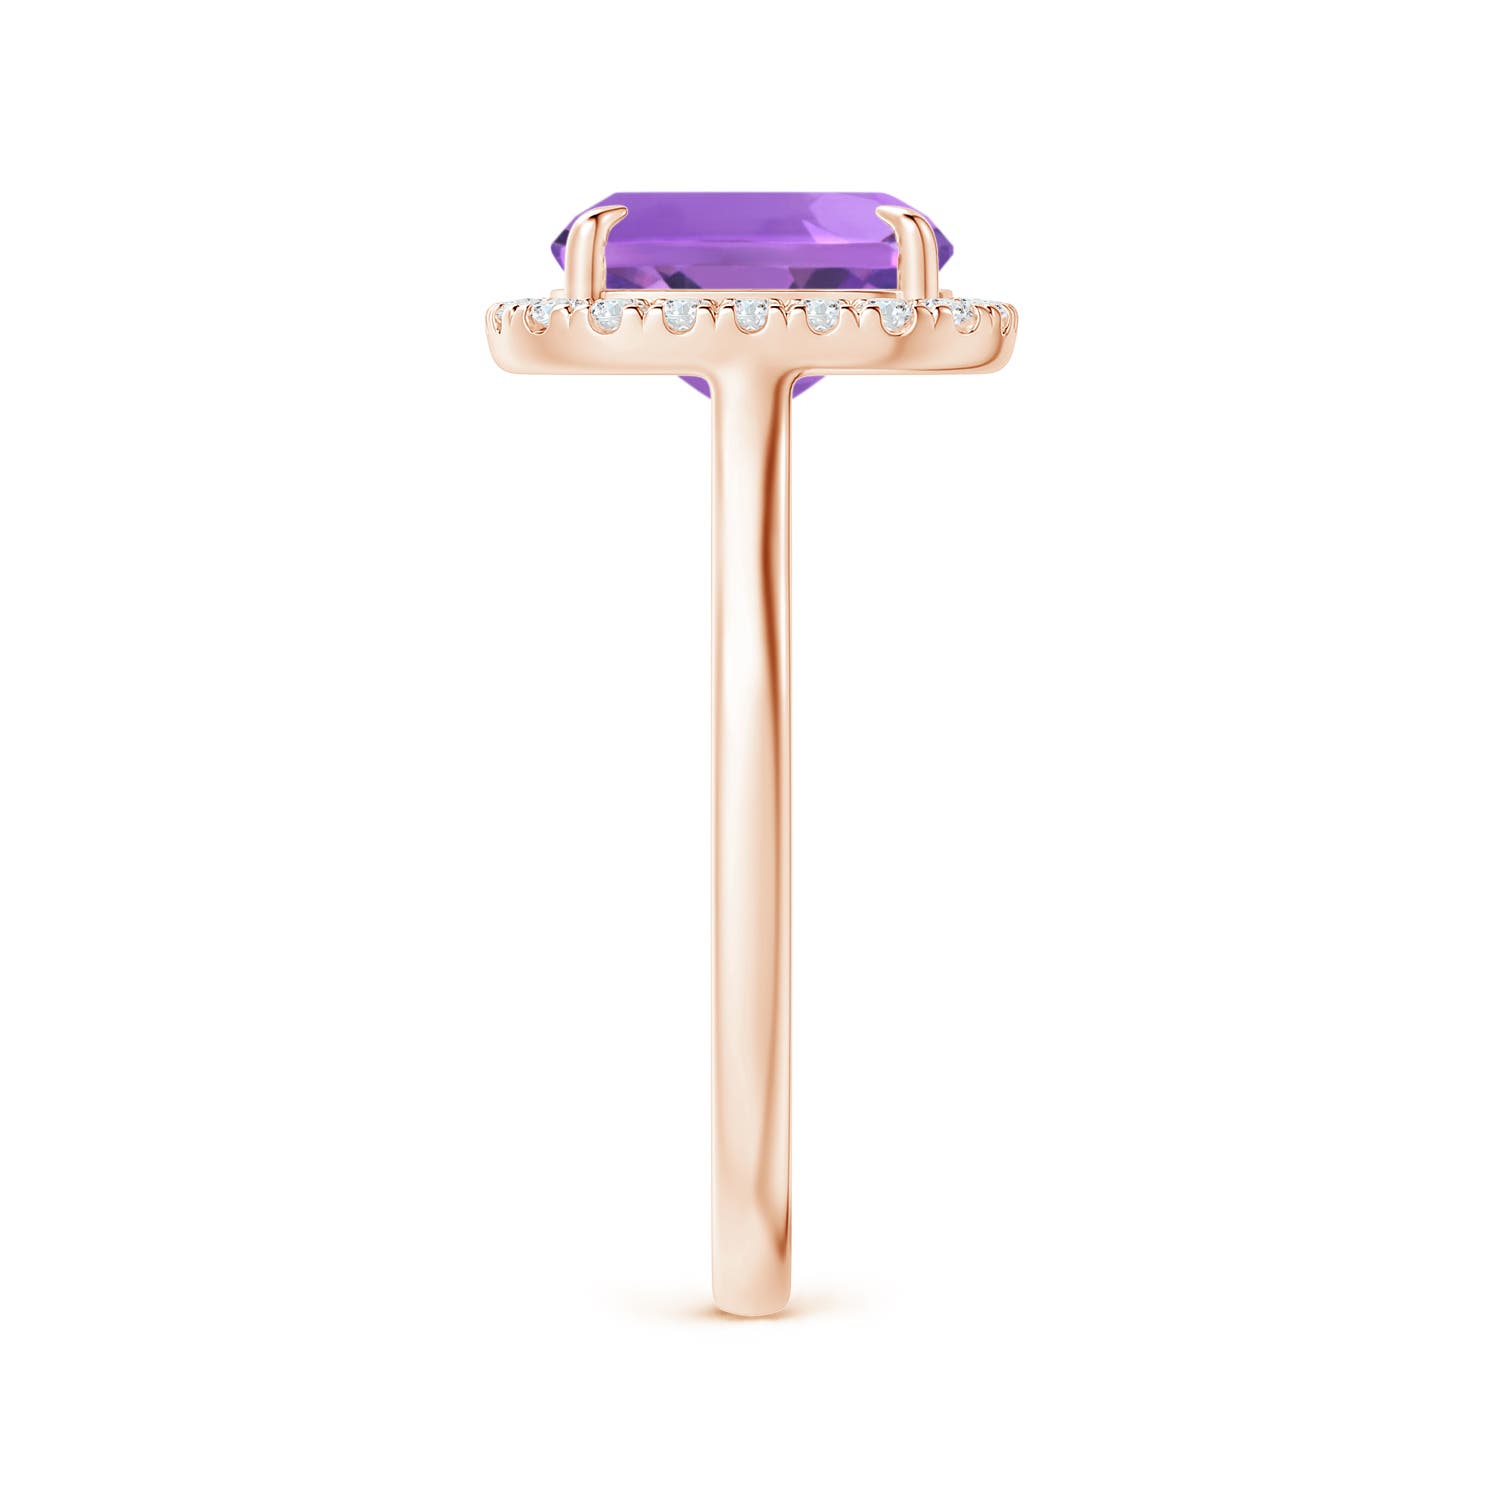 AA - Amethyst / 2.22 CT / 14 KT Rose Gold